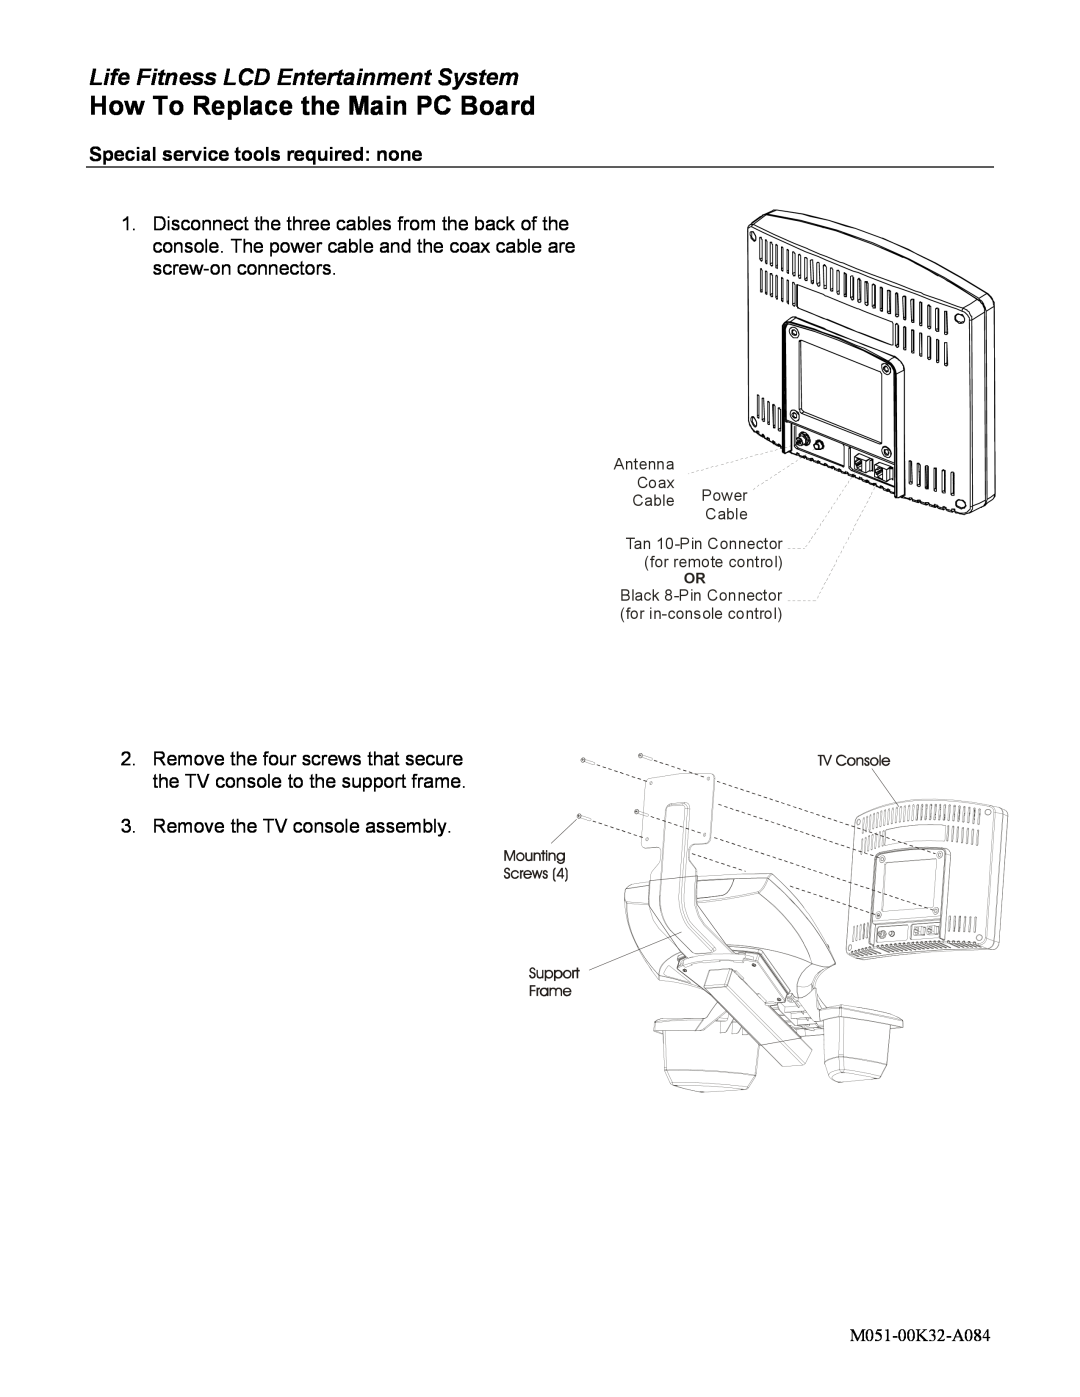 Life Fitness M051-00K32-A084 manual How To Replace the Main PC Board, Life Fitness LCD Entertainment System 